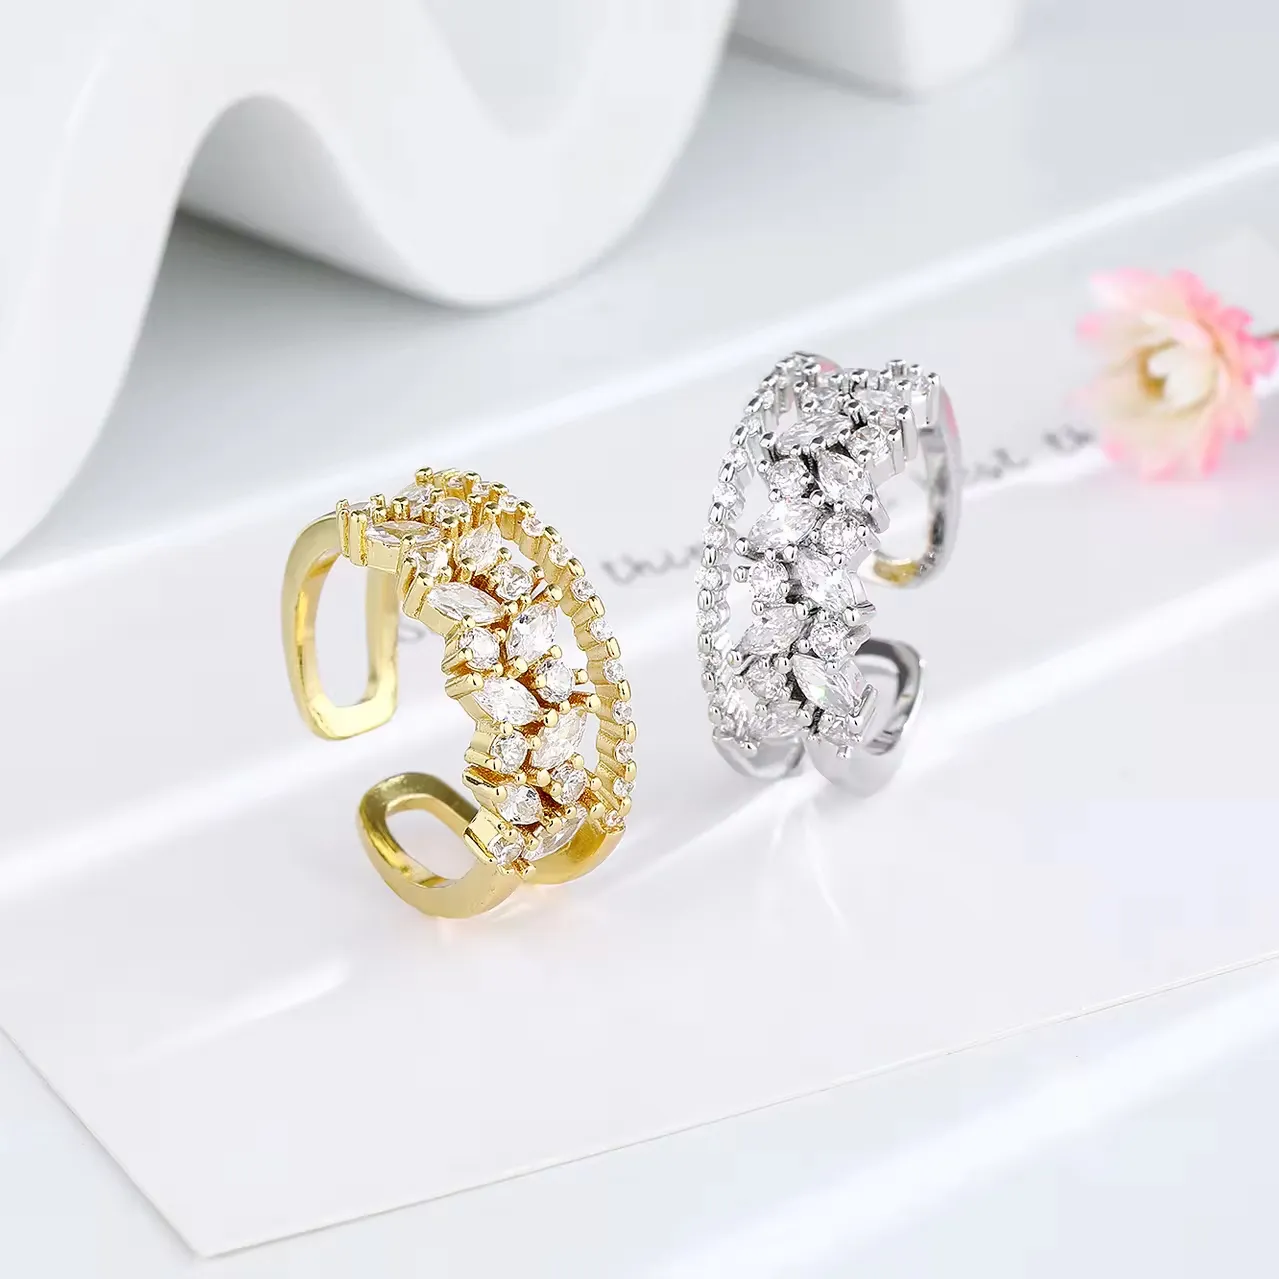 High grade micro inlaid ring female internet celebrity design versatile cool and cool style double layered open index ring